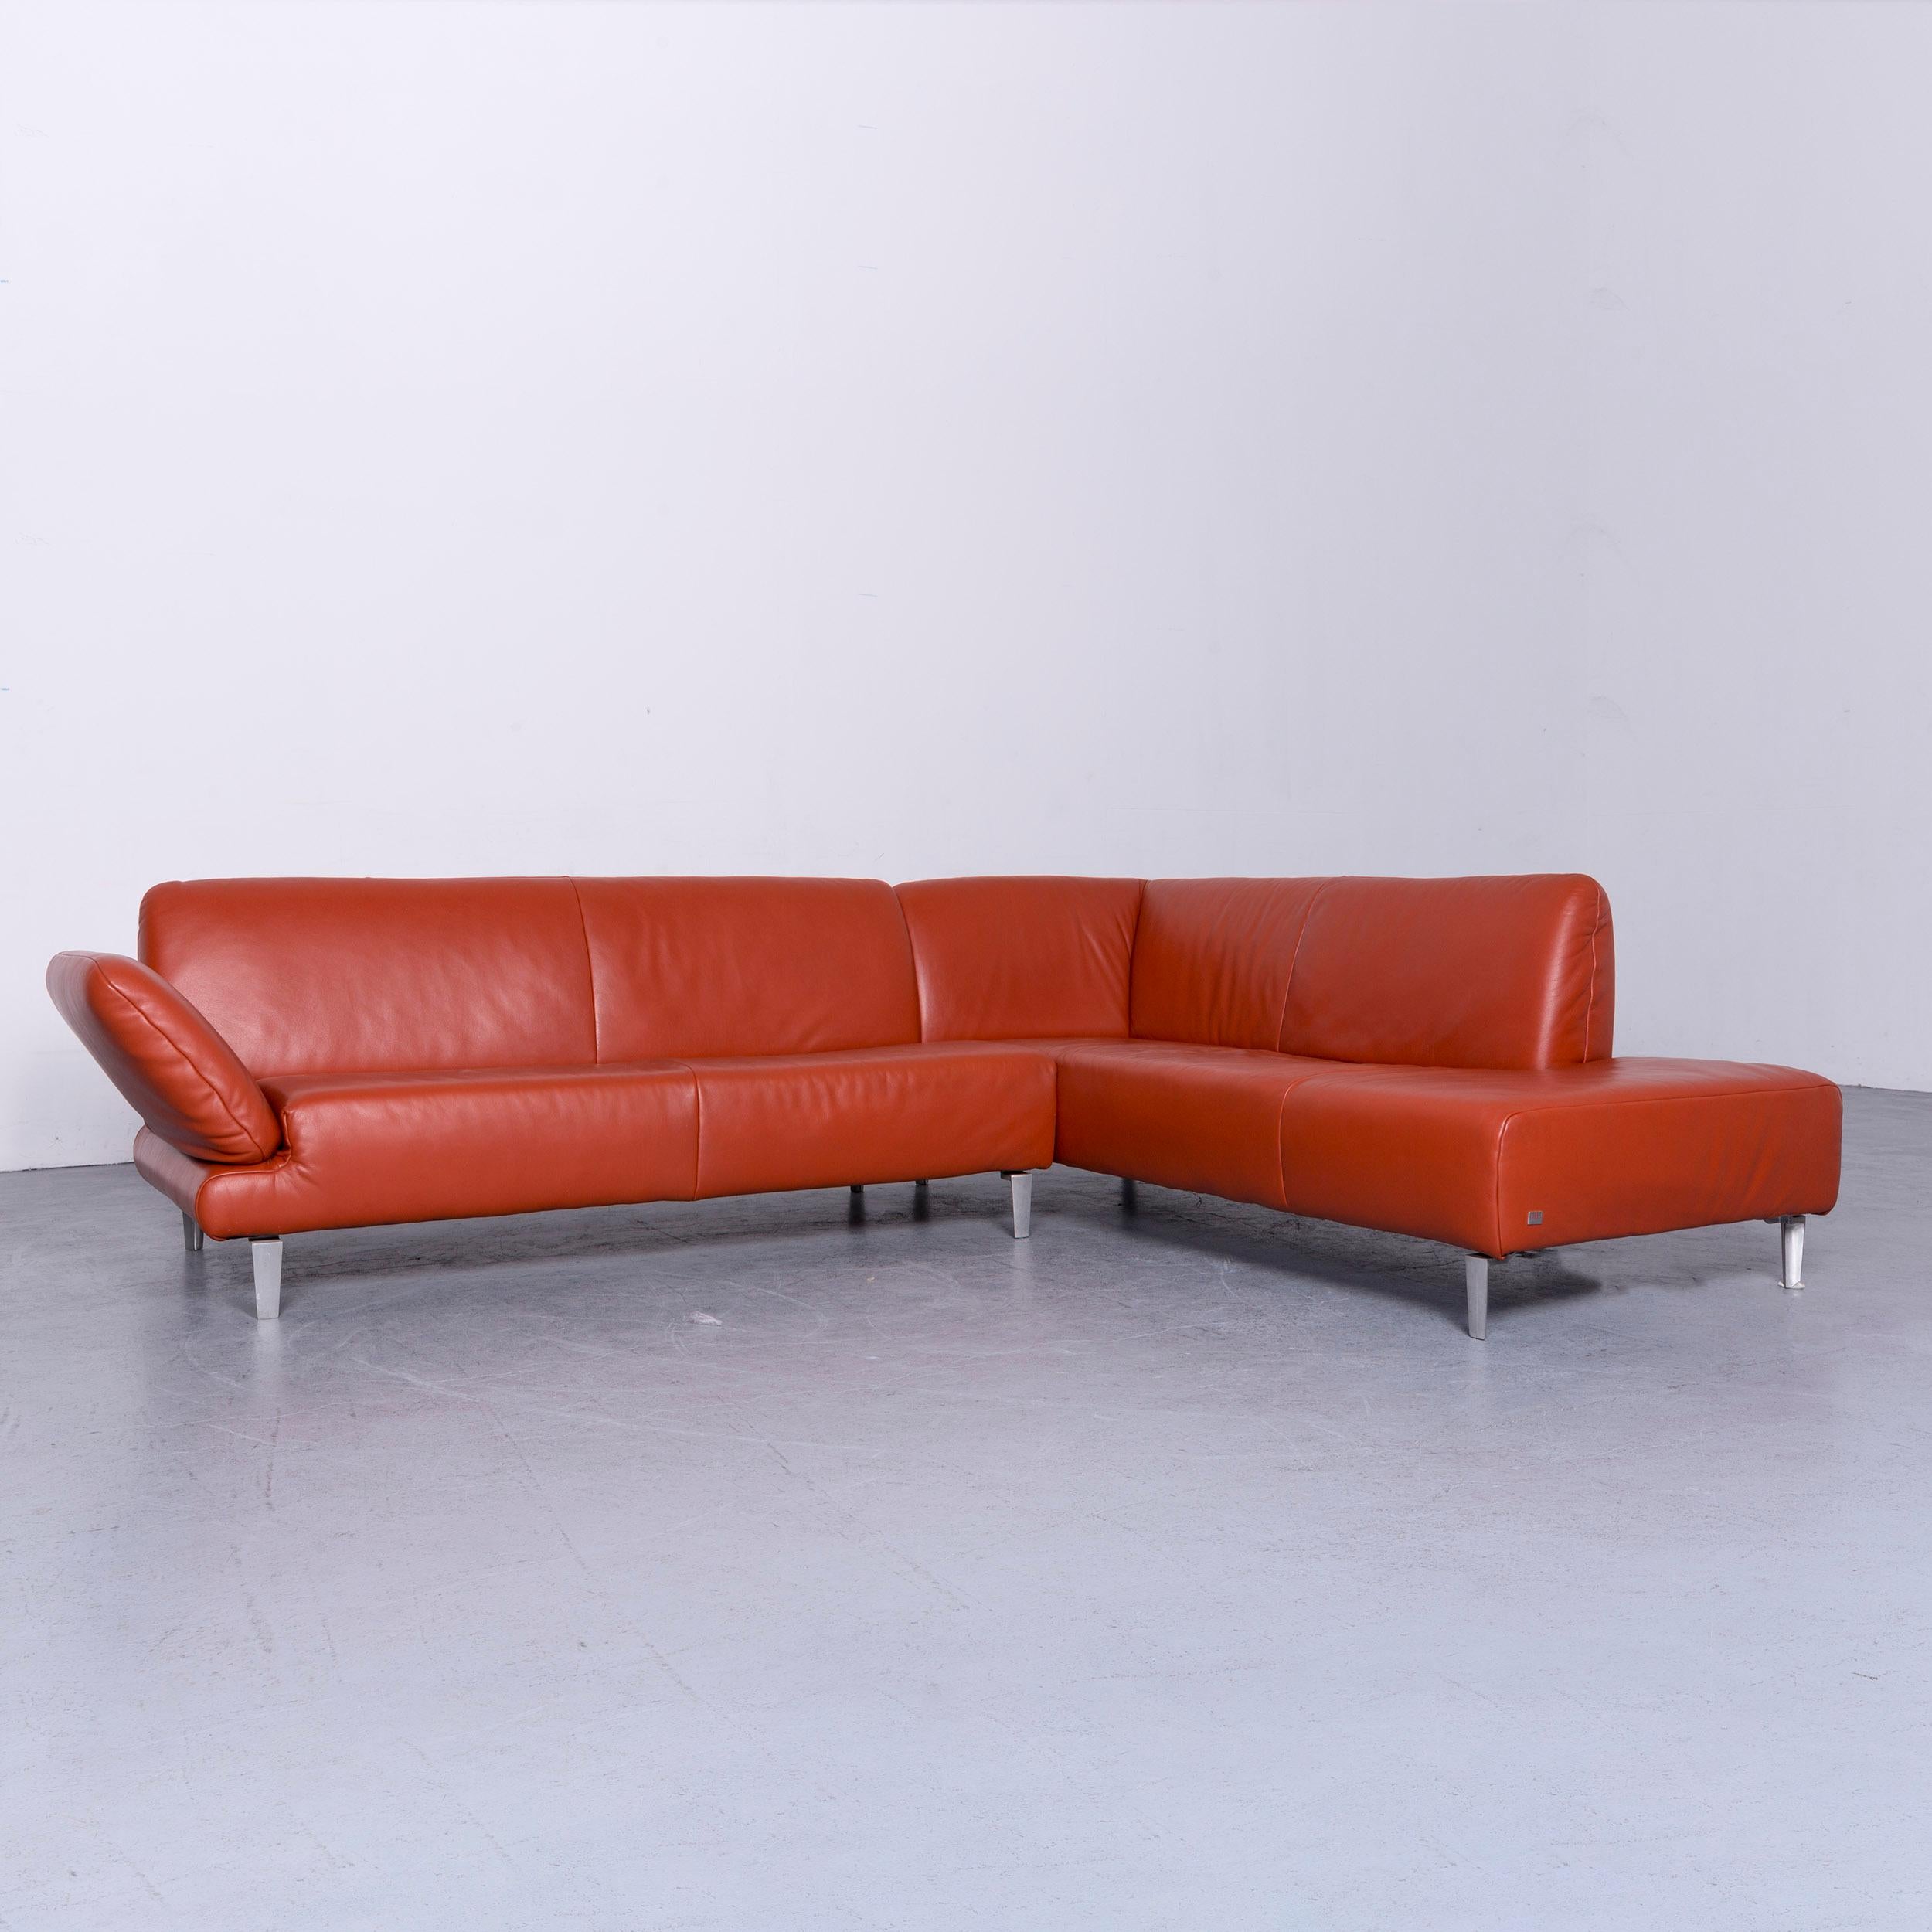 We bring to you a Koinor designer leather sofa in orange corner-sofa couch.